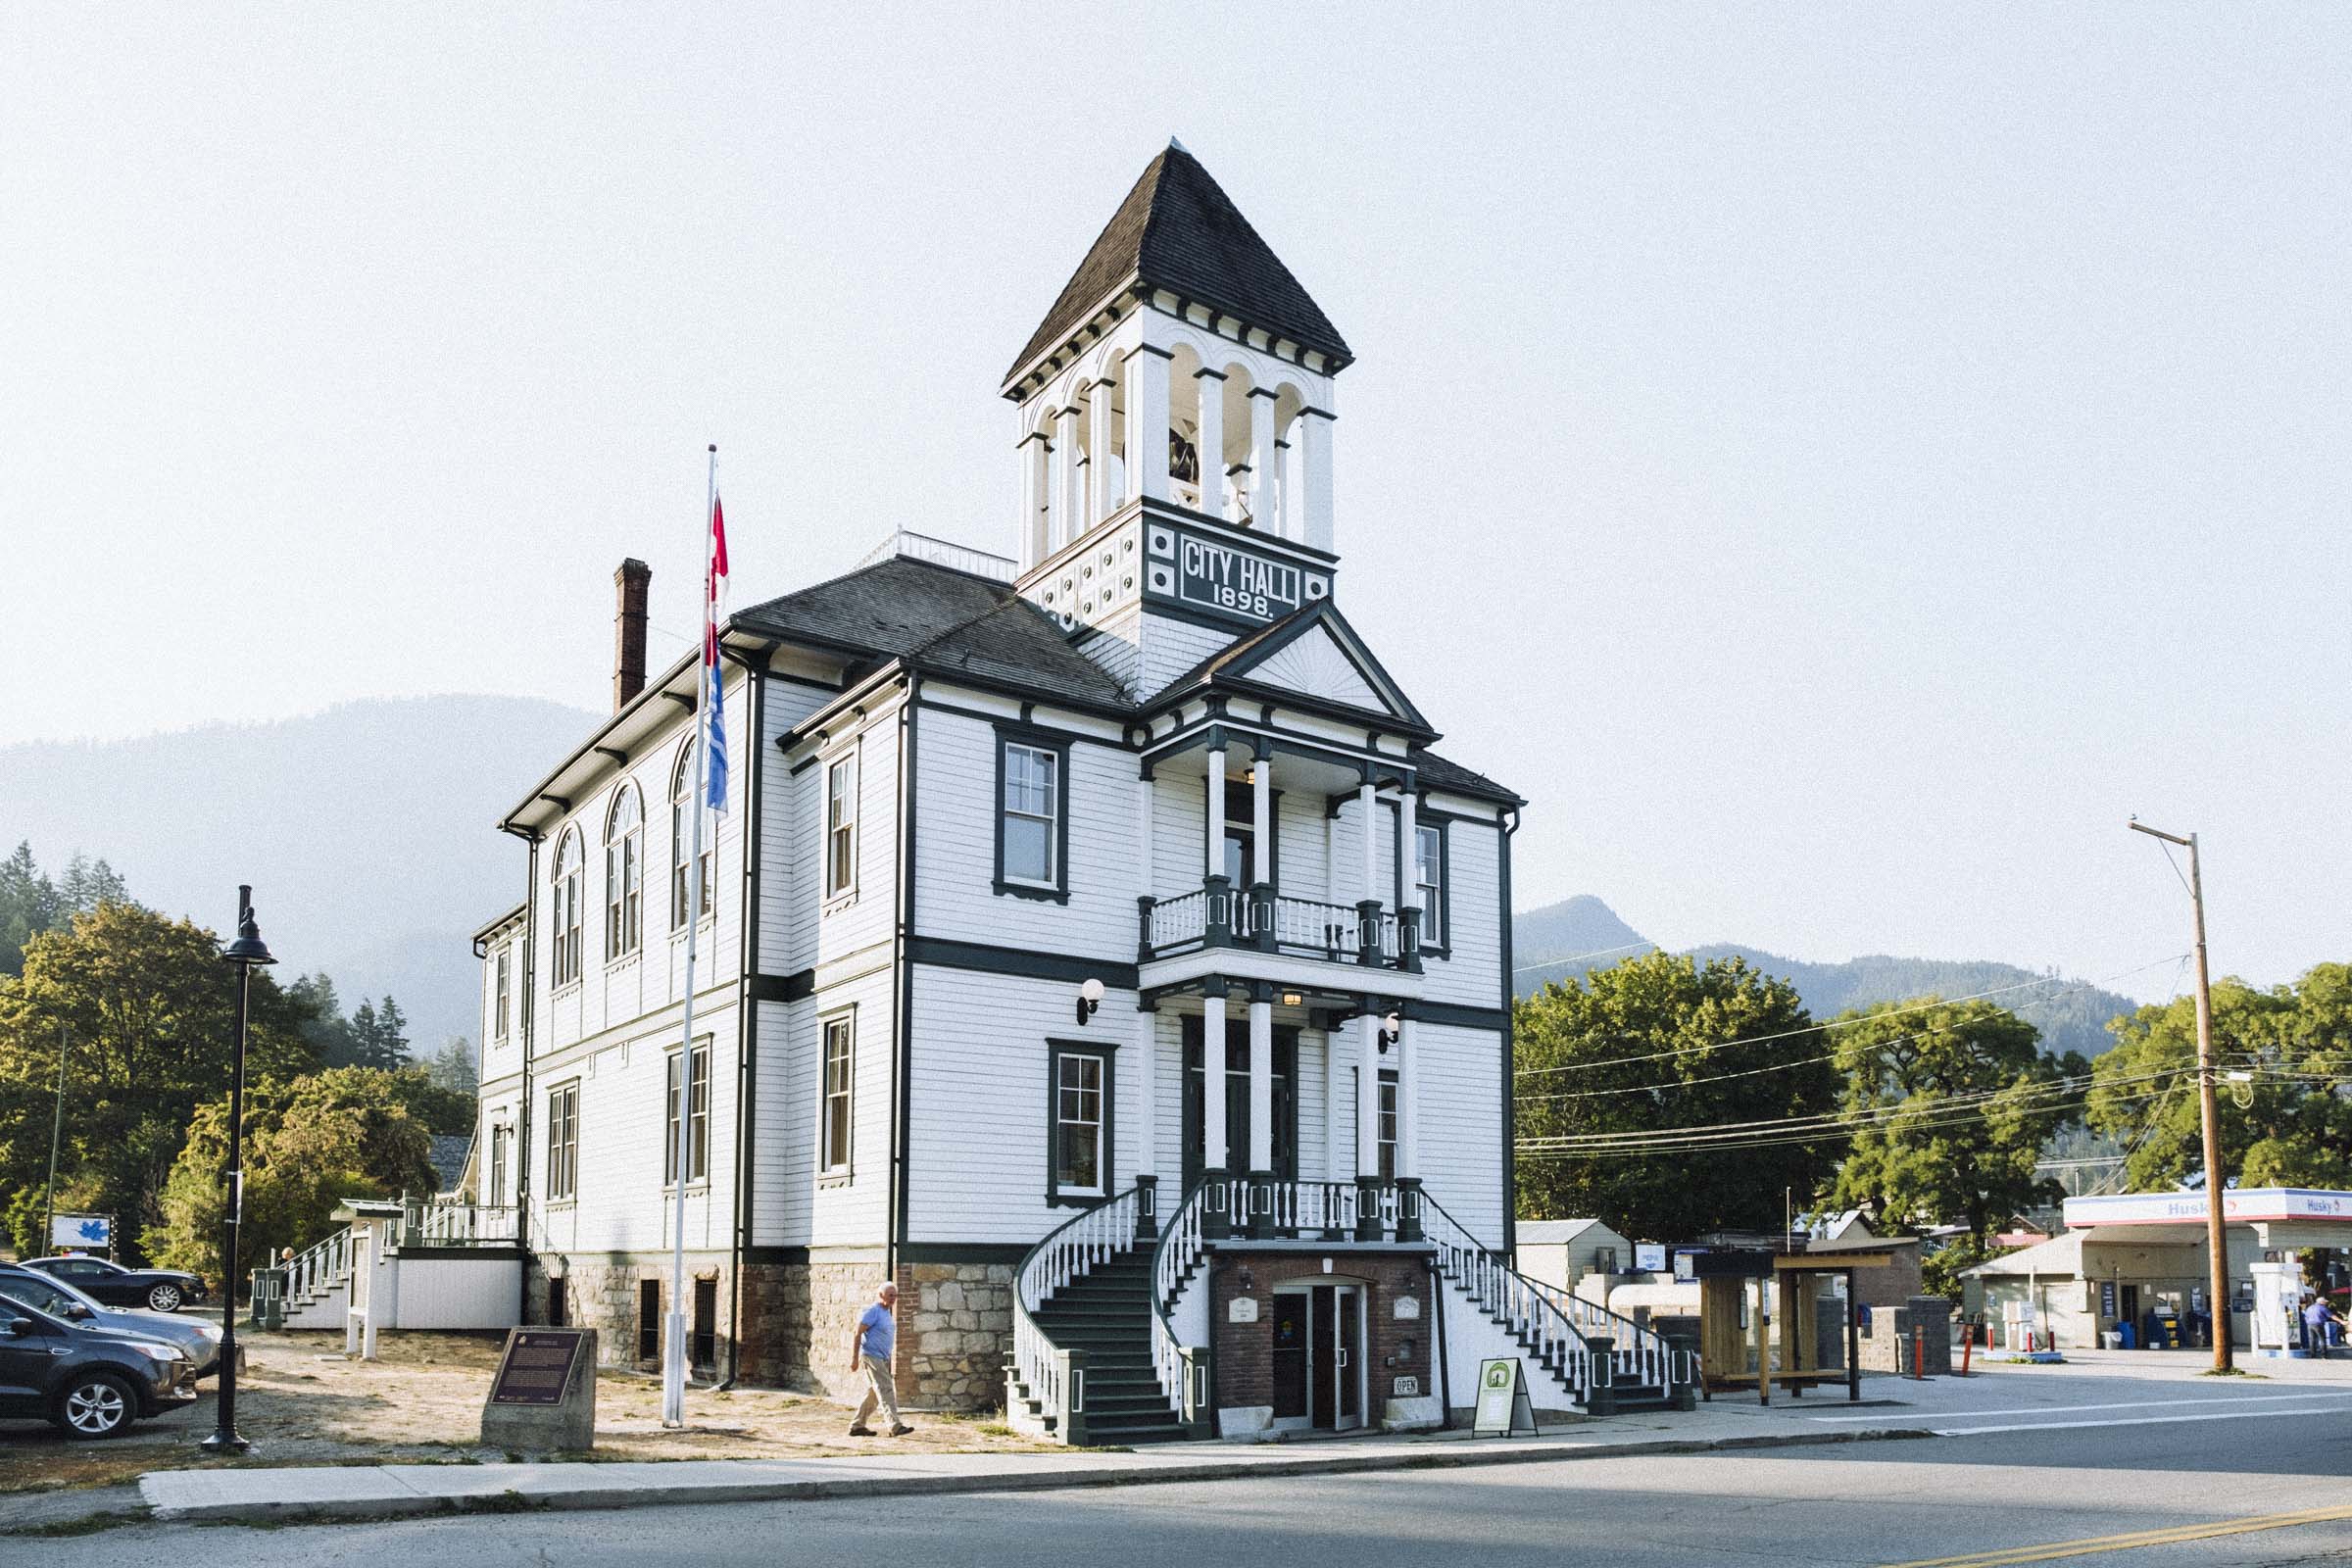 The historic city hall in Kaslo